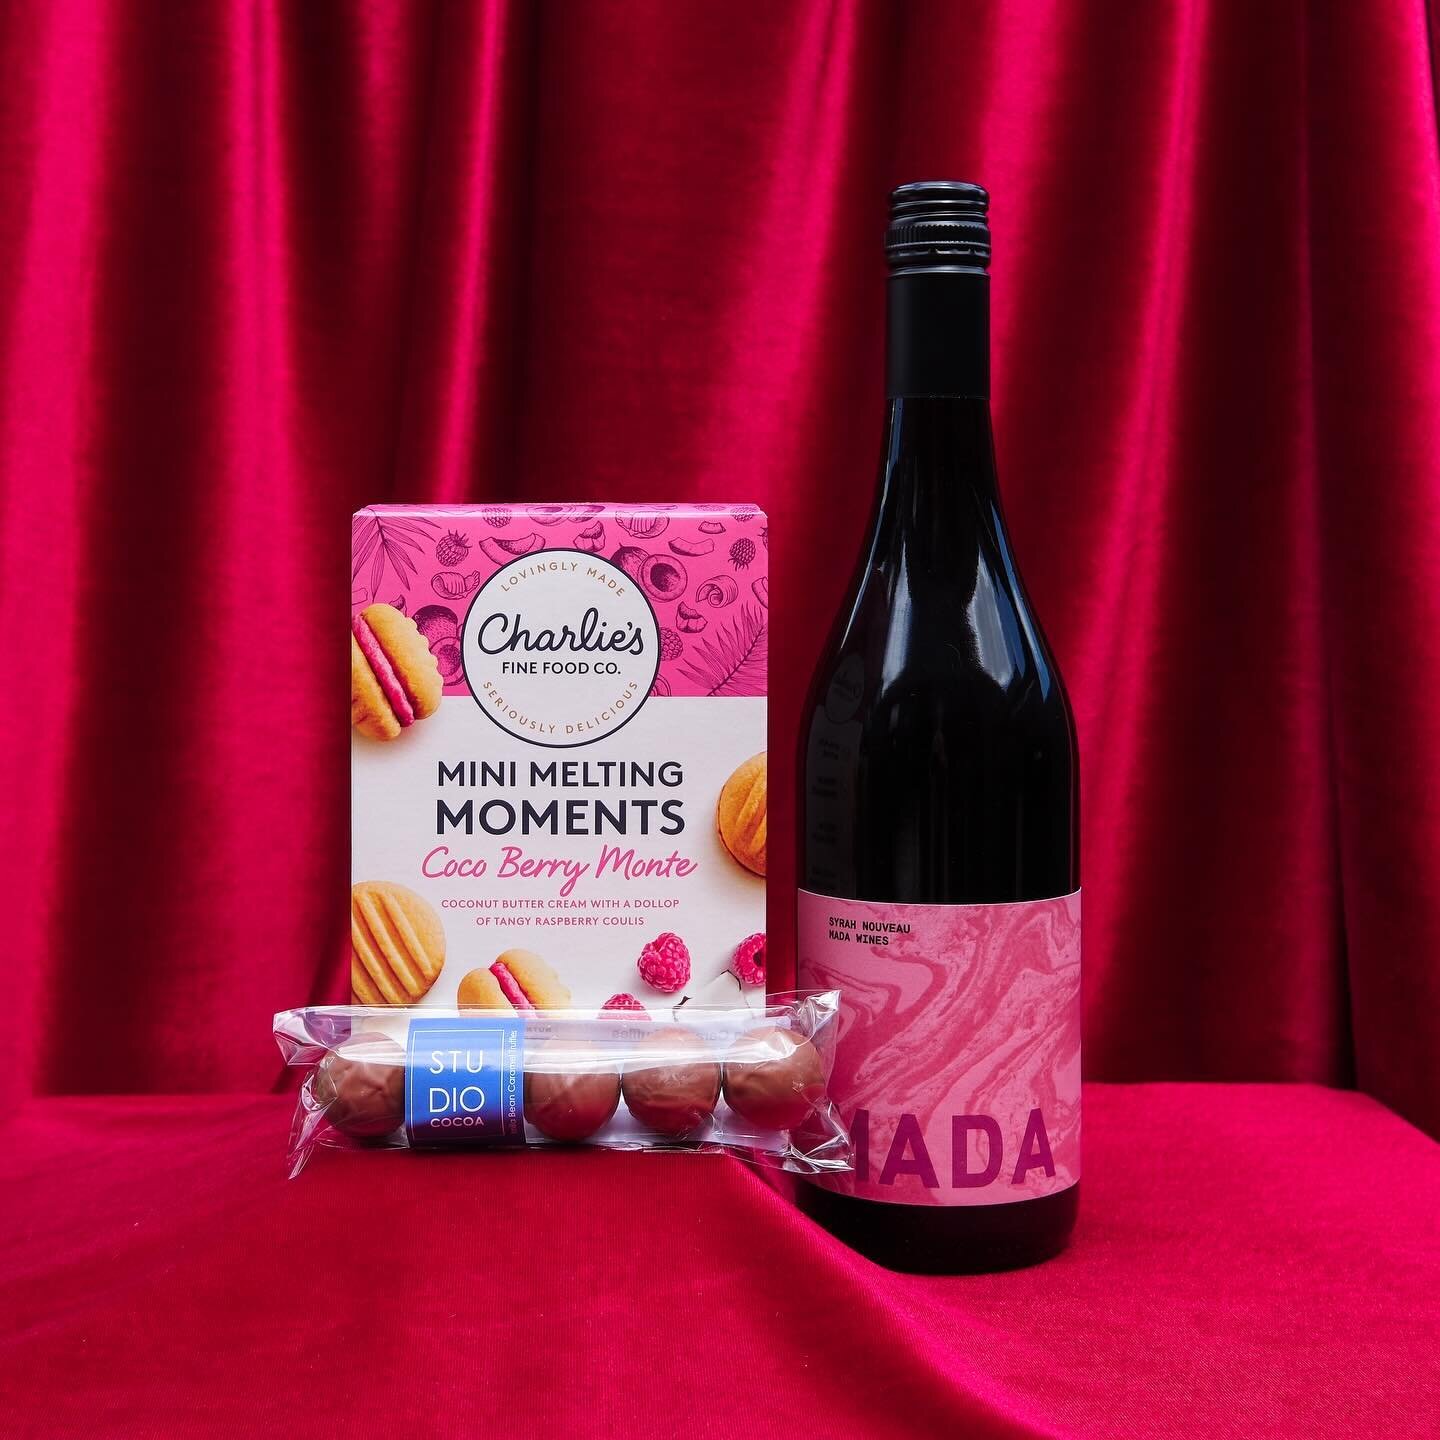 🚨🩷 2 DAYS TO GET LOVED UP CANBERRA 🩷🚨

You read that right, the loveliest day of the year is coming up this Wednesday 14 February 💘

Pre-order your Valentine&rsquo;s Day gift now for free delivery within the Canberra region this Wednesday 💝

Gi